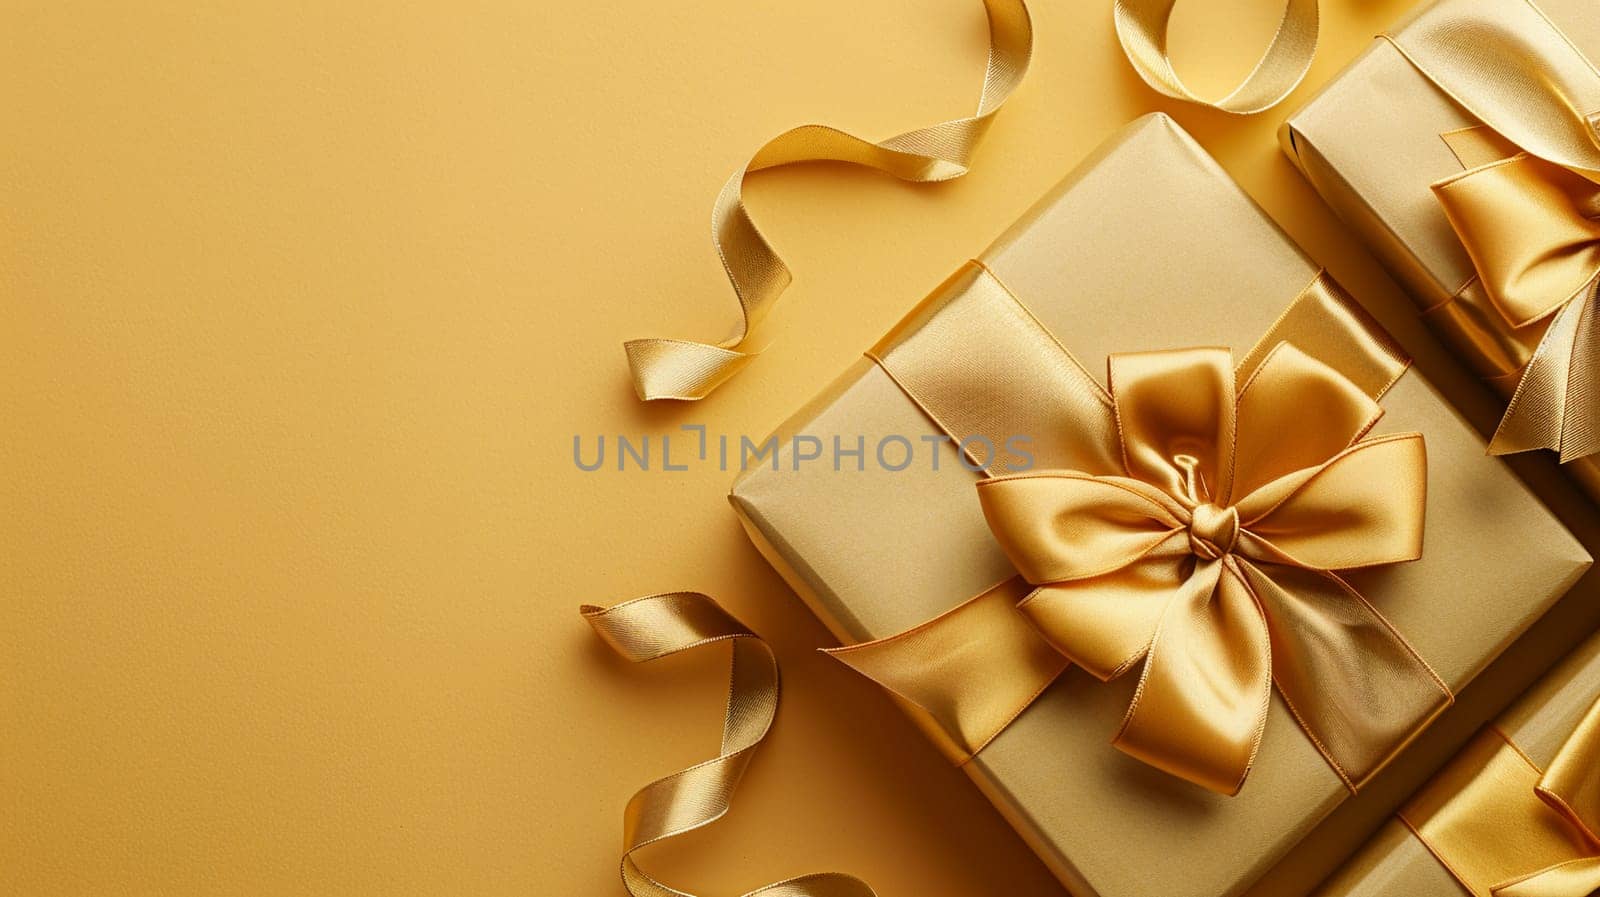 Top view of elegant gift boxes wrapped with golden ribbons against a vibrant yellow background, conveying luxury and celebration.